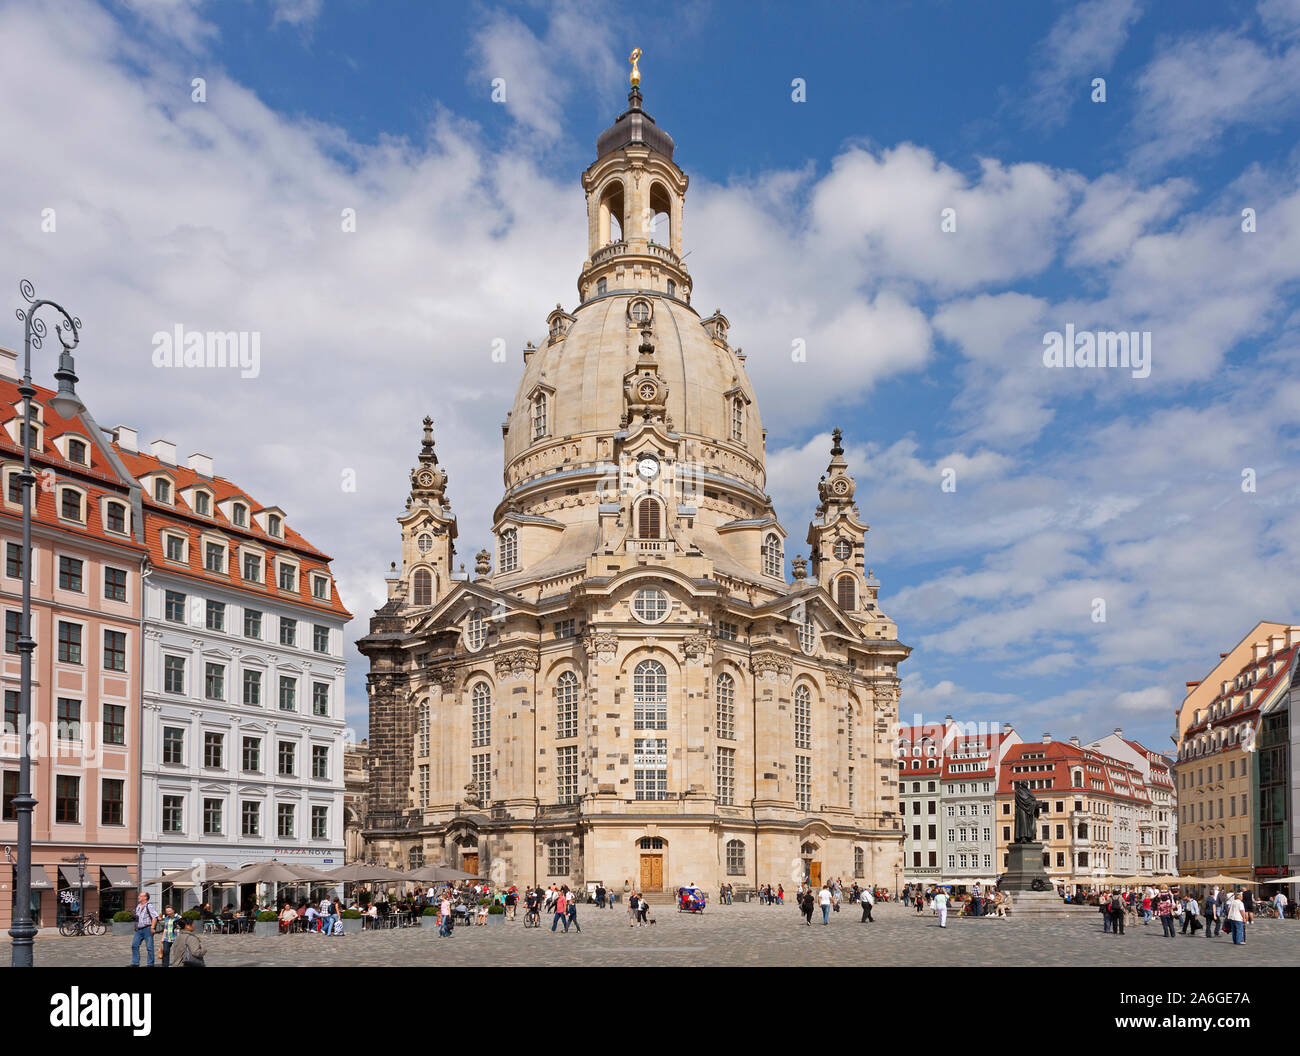 The Church of Our Lady in Dresden, Saxony, Germany, was destroyed in World War II and has since been rebuilt. Stock Photo